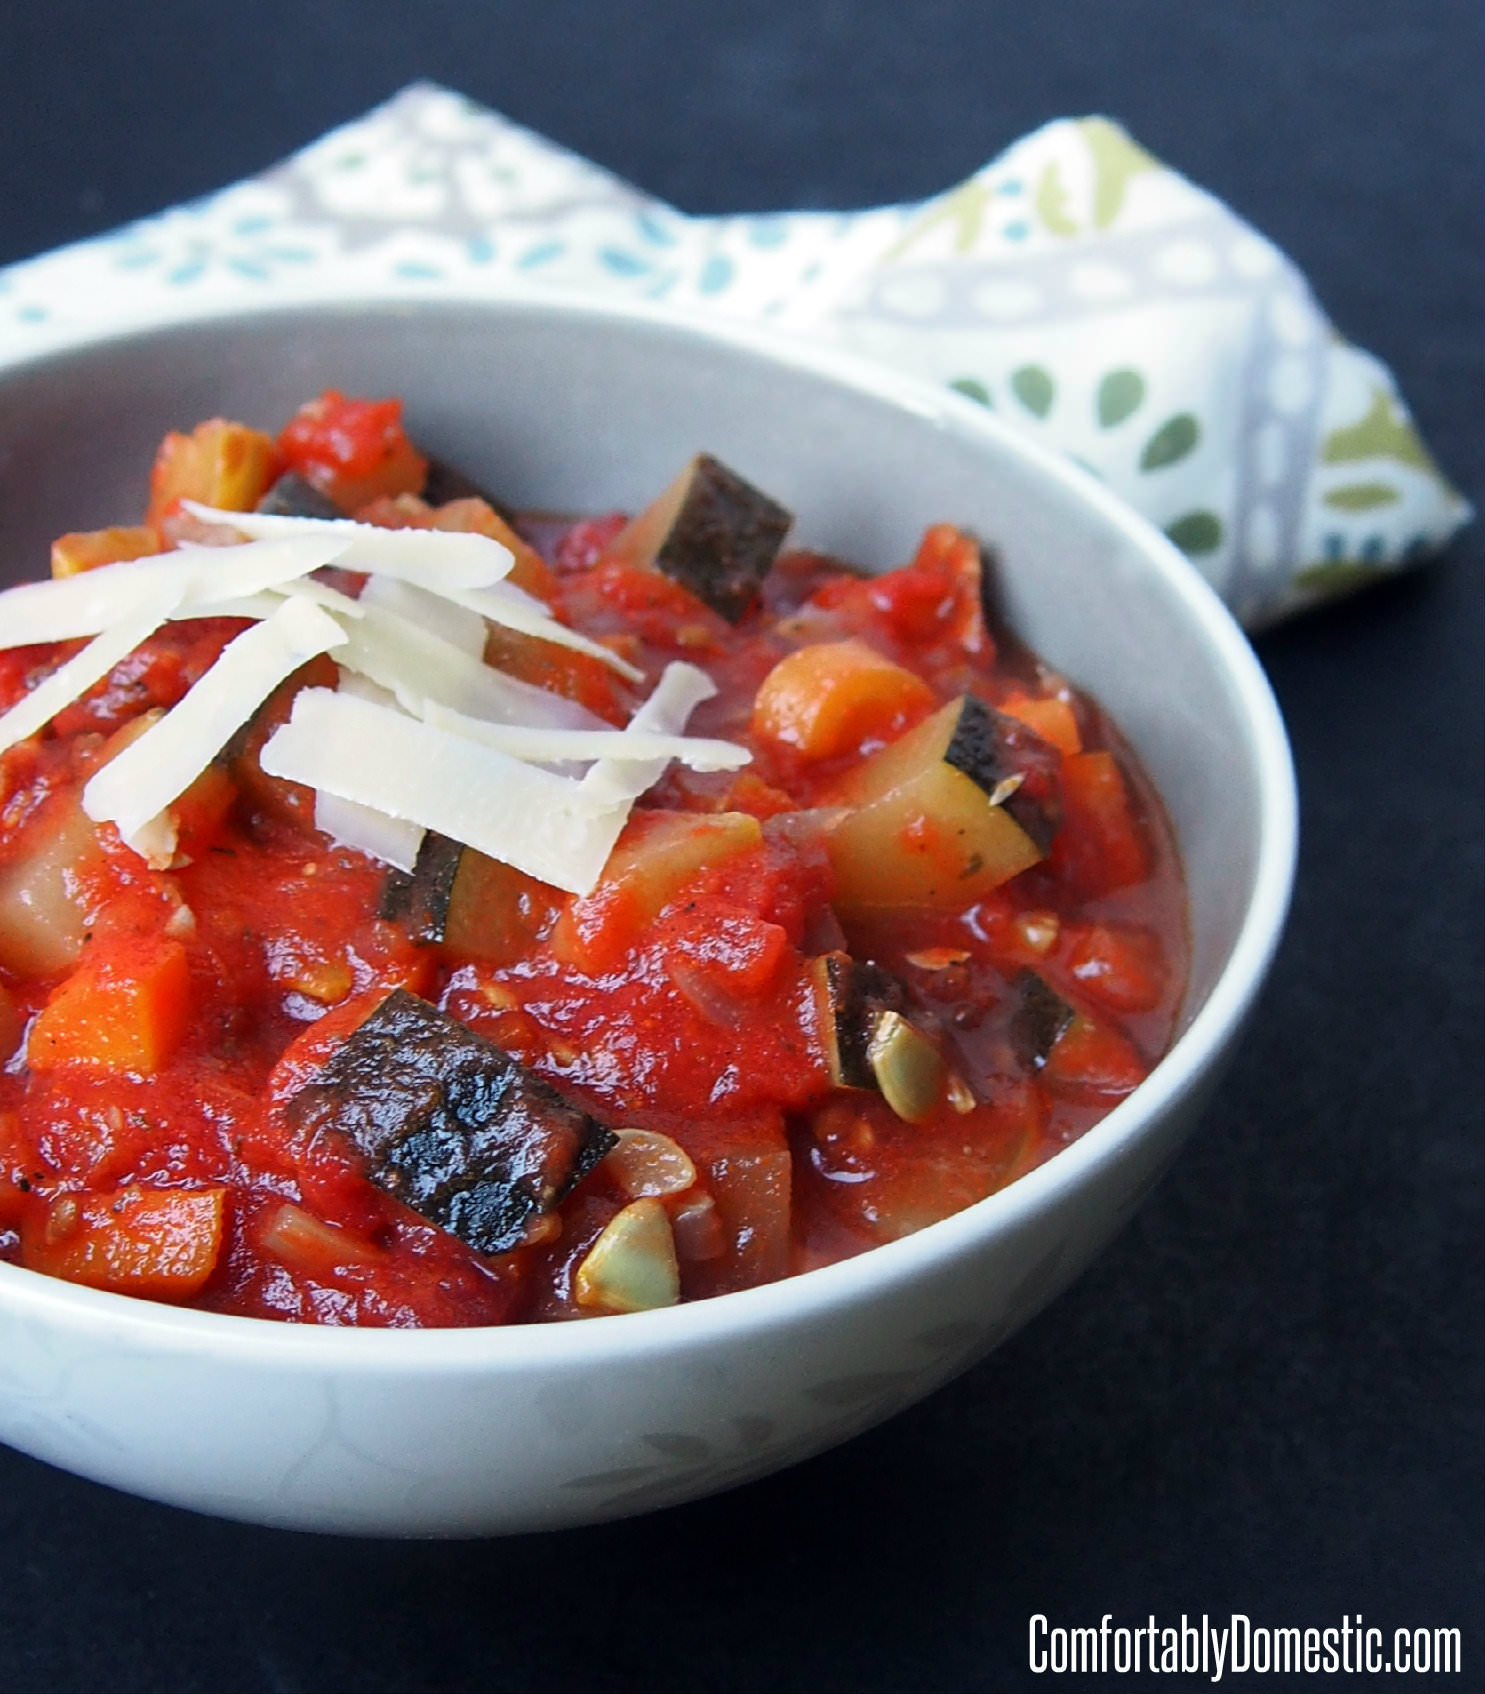 Homemade Ratatouille is a hearty, fresh vegetable stew, meant to nourish your body and warm your soul. | ComfortablyDomestic.com